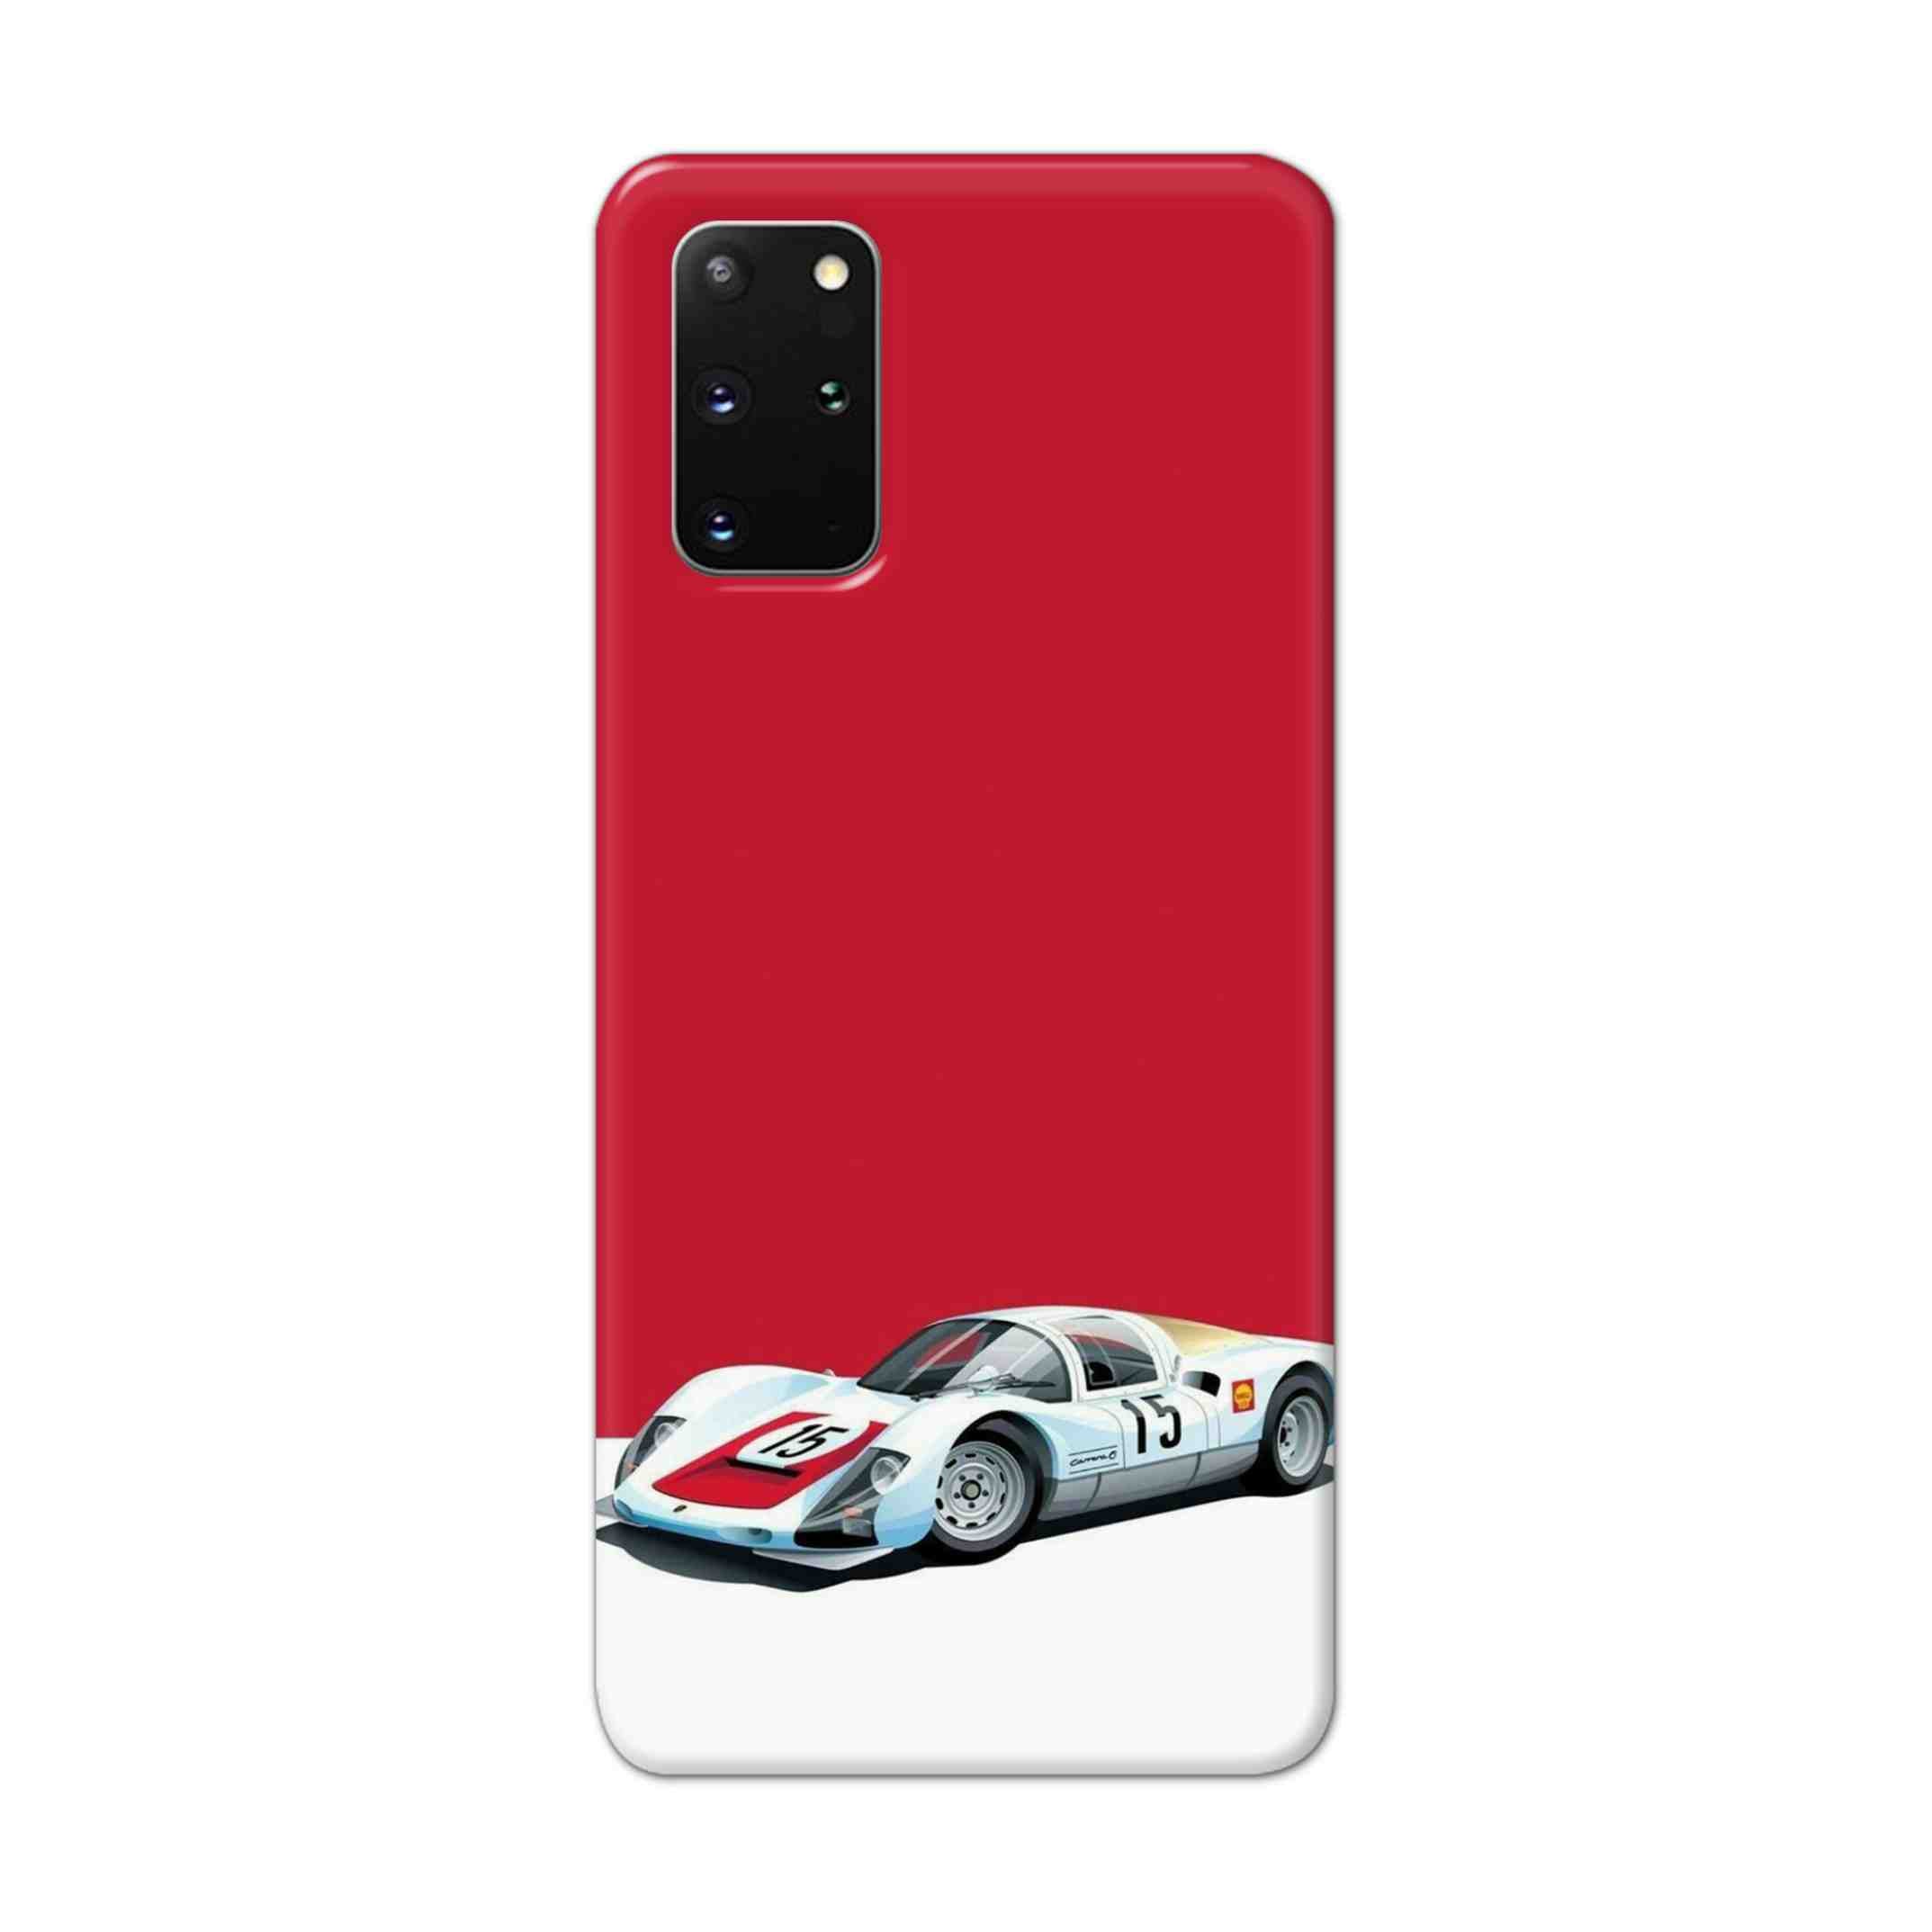 Buy Ferrari F15 Hard Back Mobile Phone Case Cover For Samsung Galaxy S20 Plus Online